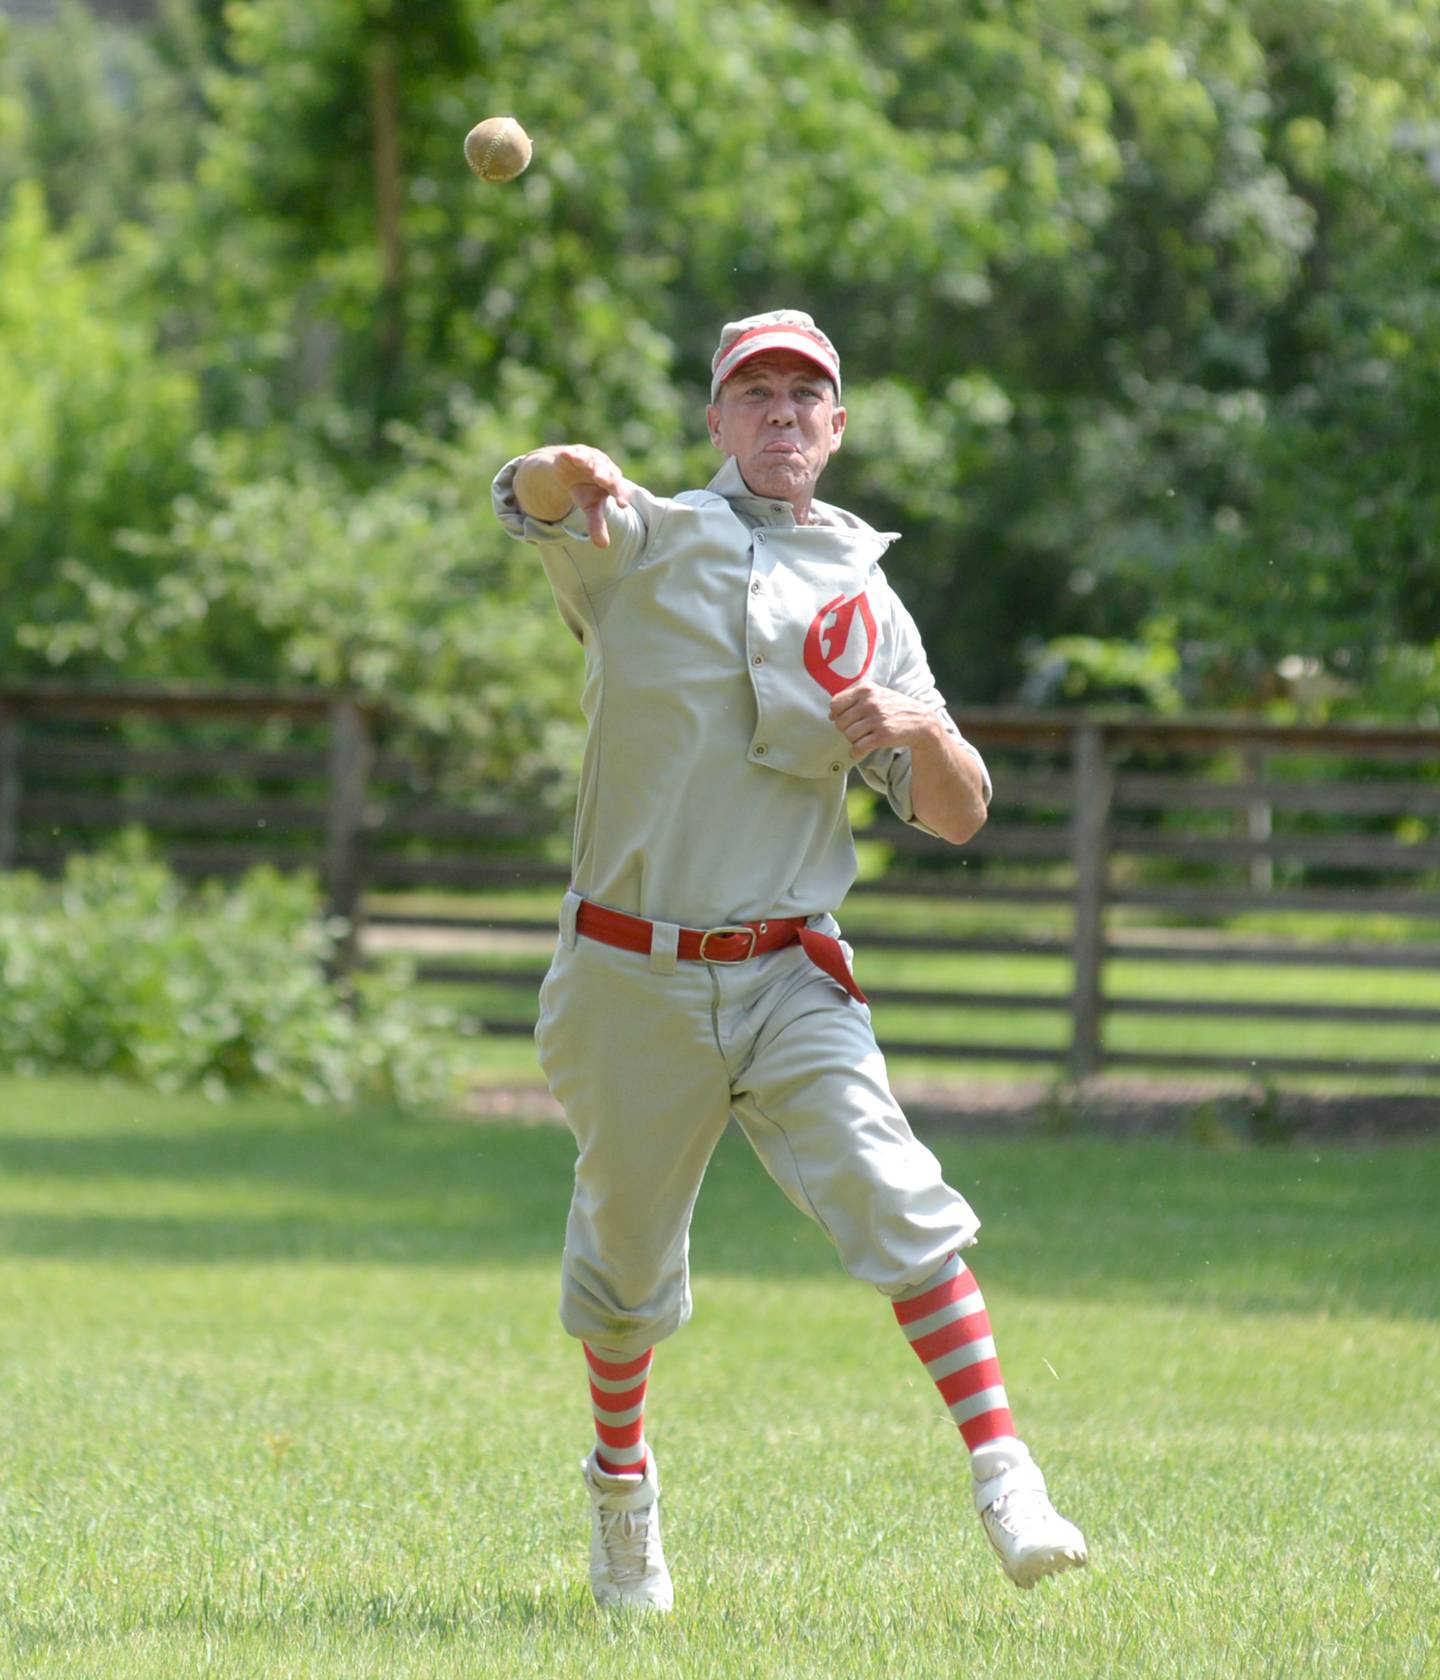 Bill "Dollar Bill" Roschi throws to first after fielding a grounder at third base  during the Oregon Ganymedes' Vintage Base Ball game with the DuPage Plowboys on Saturday, June 3 at the John Deere Historic Site in Grand Detour.